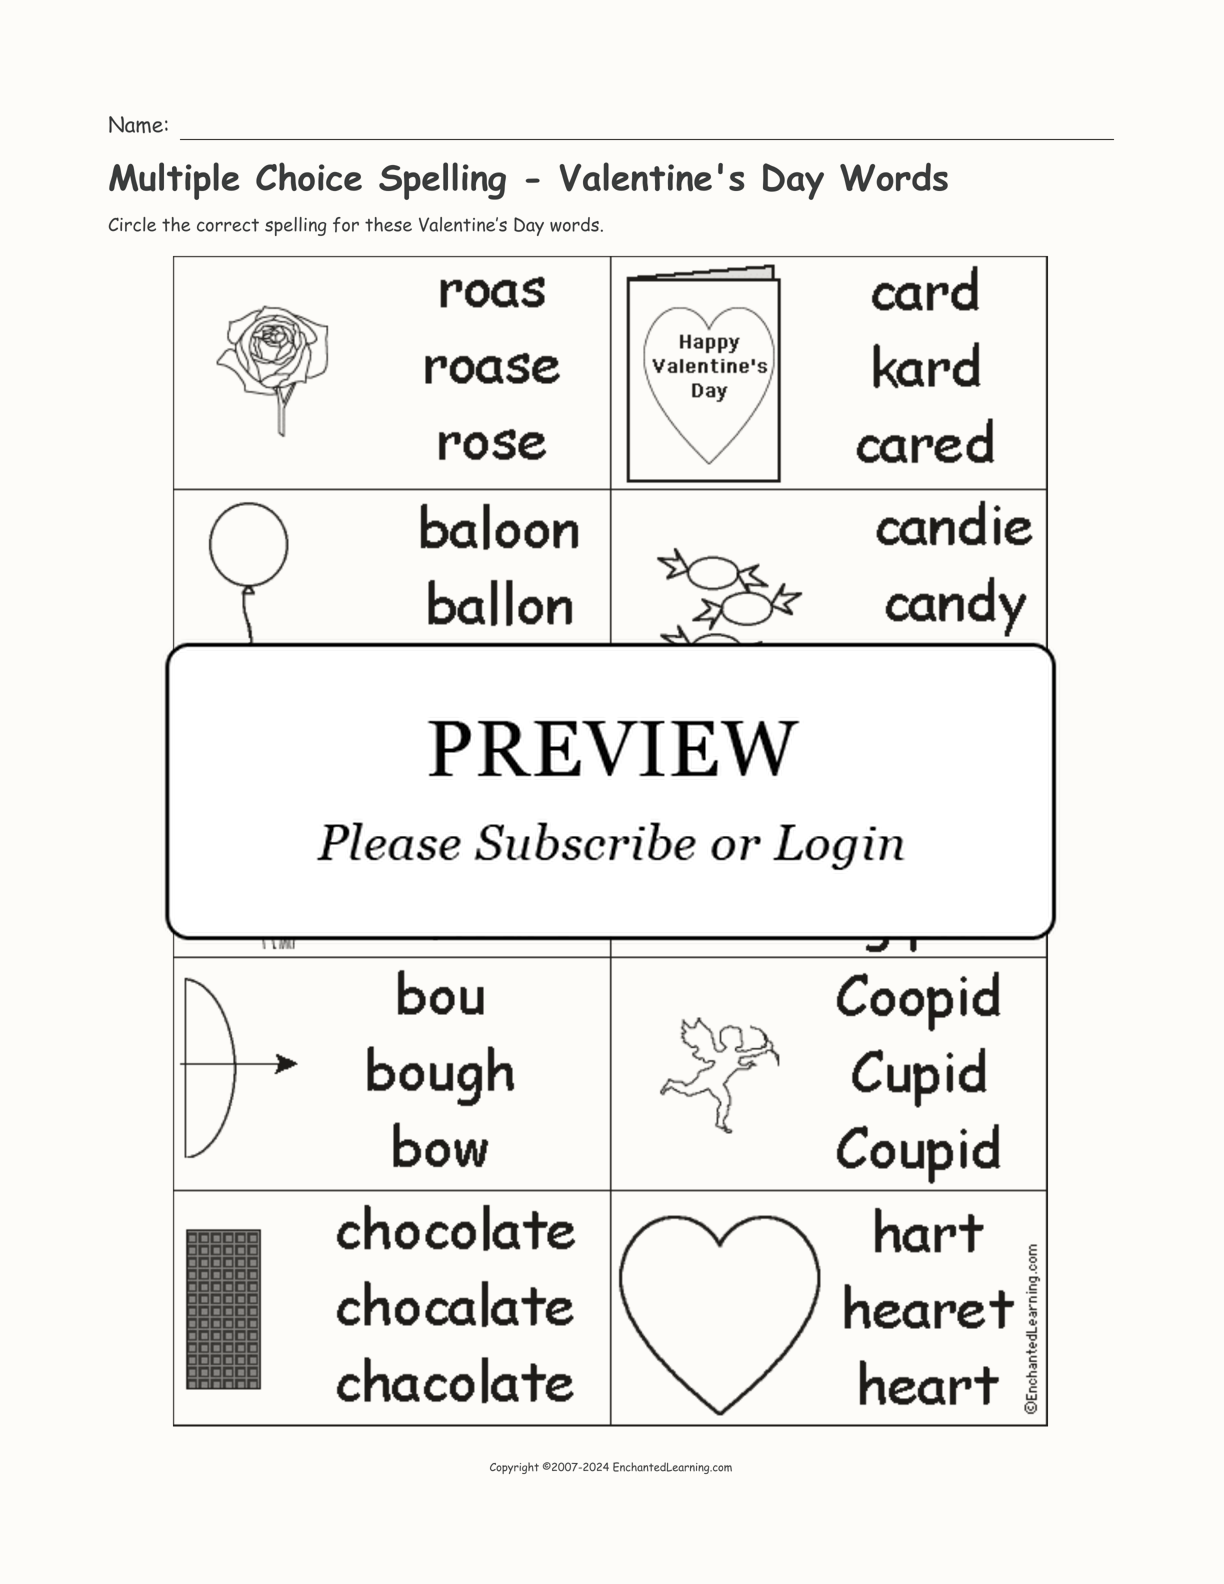 Multiple Choice Spelling - Valentine's Day Words interactive worksheet page 1